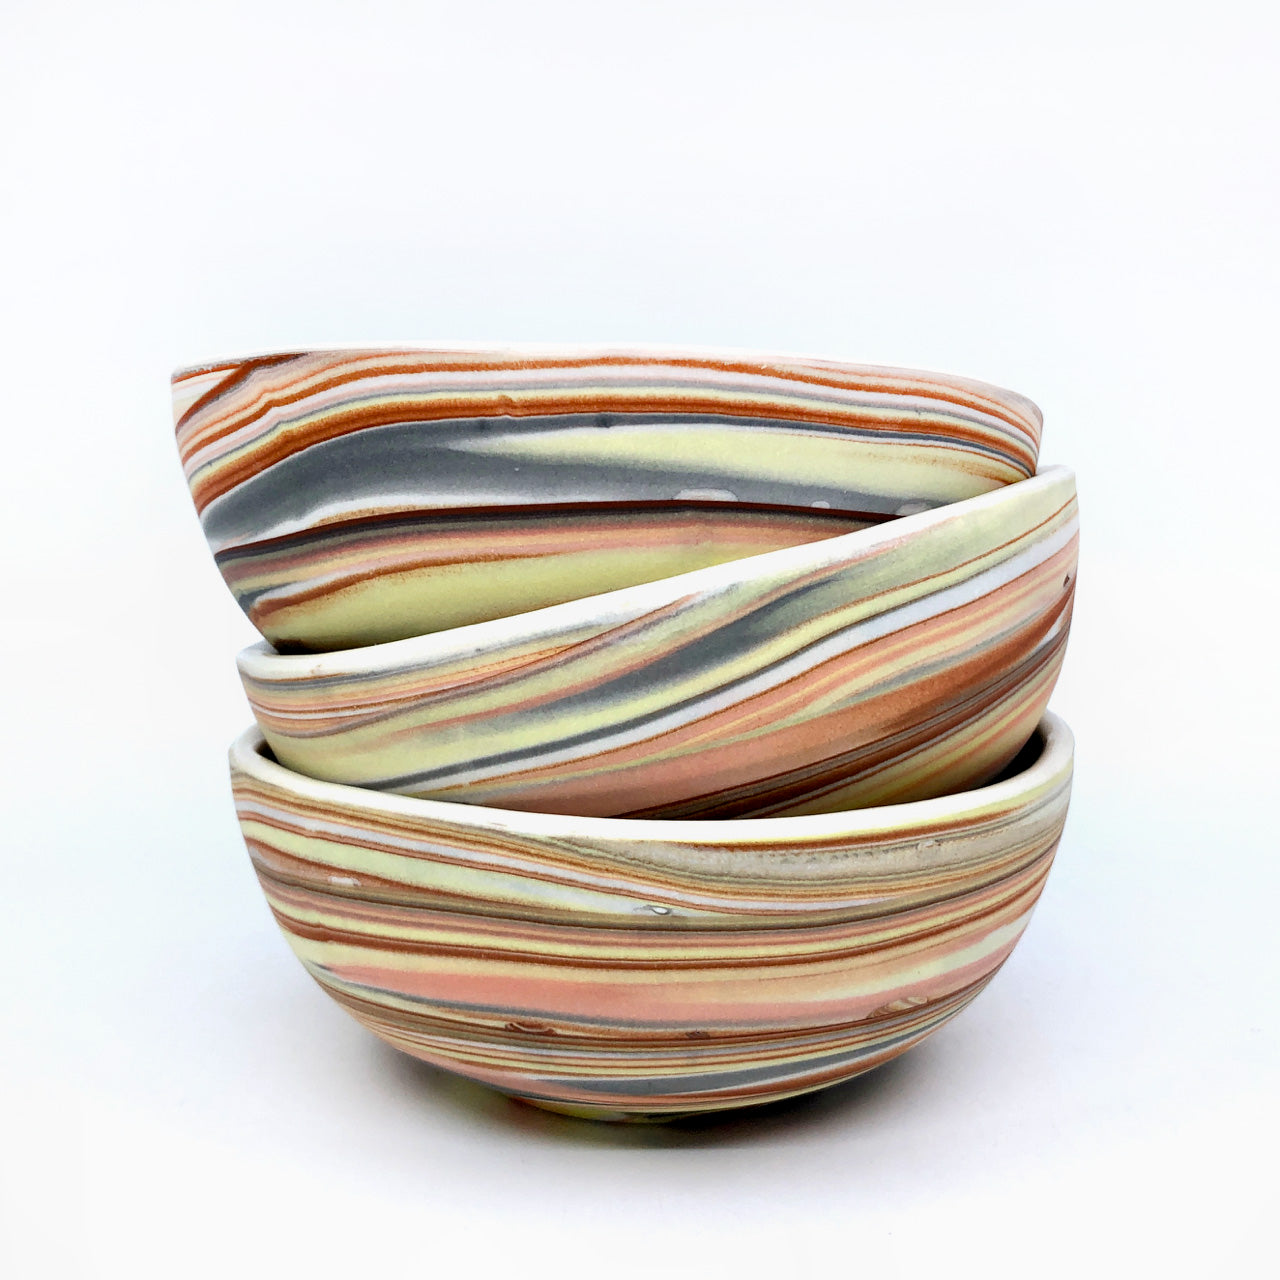 Desert Strata Soup Bowl *Made to order* ship in 4-6 weeks